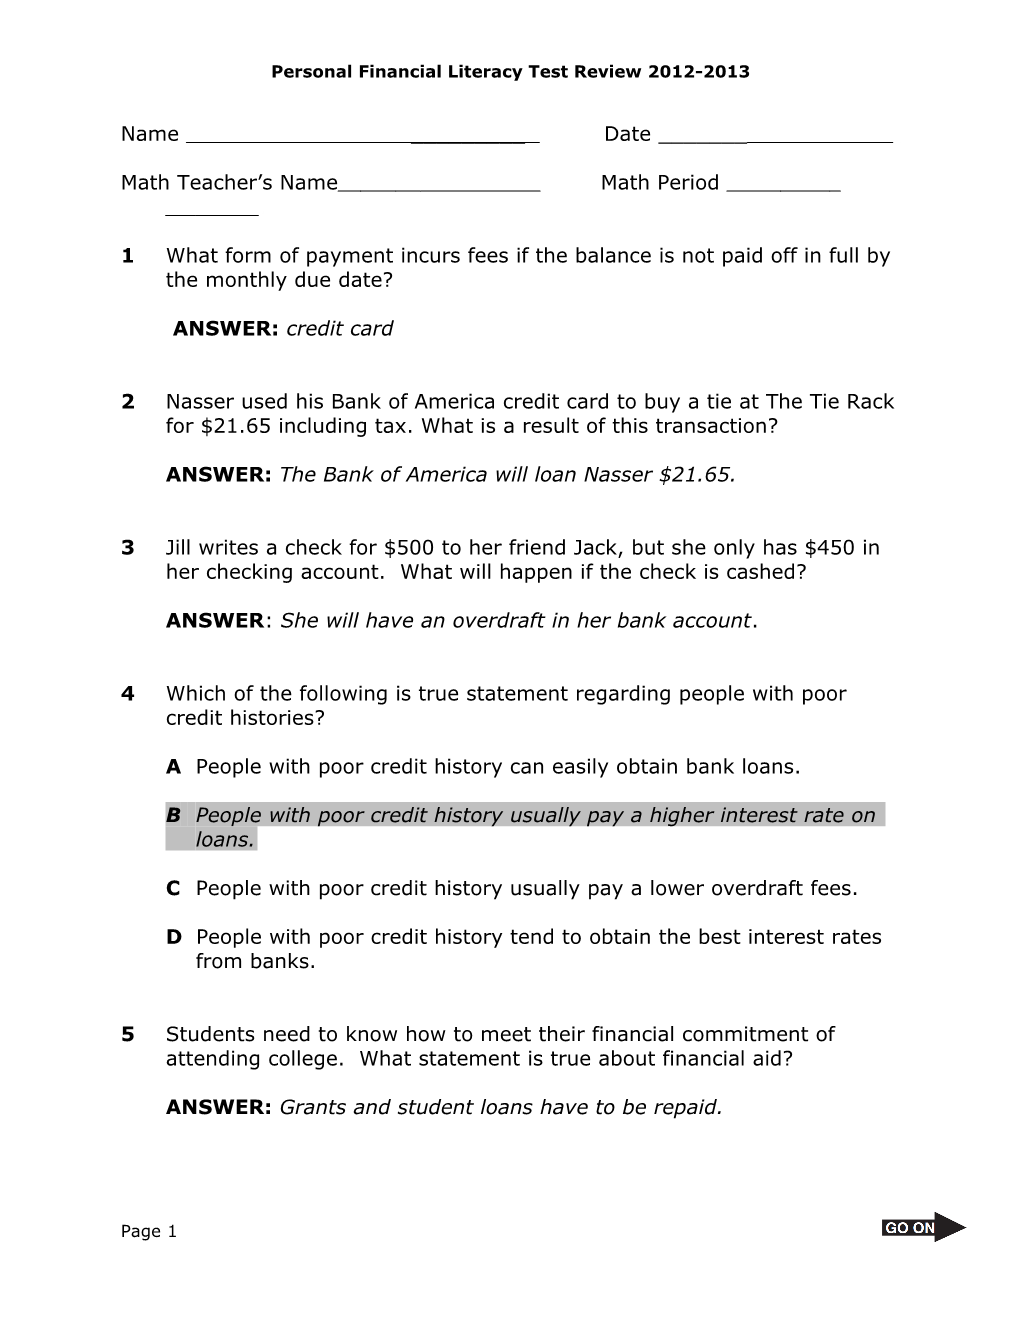 Personal Financial Literacy Test Review2012-2013